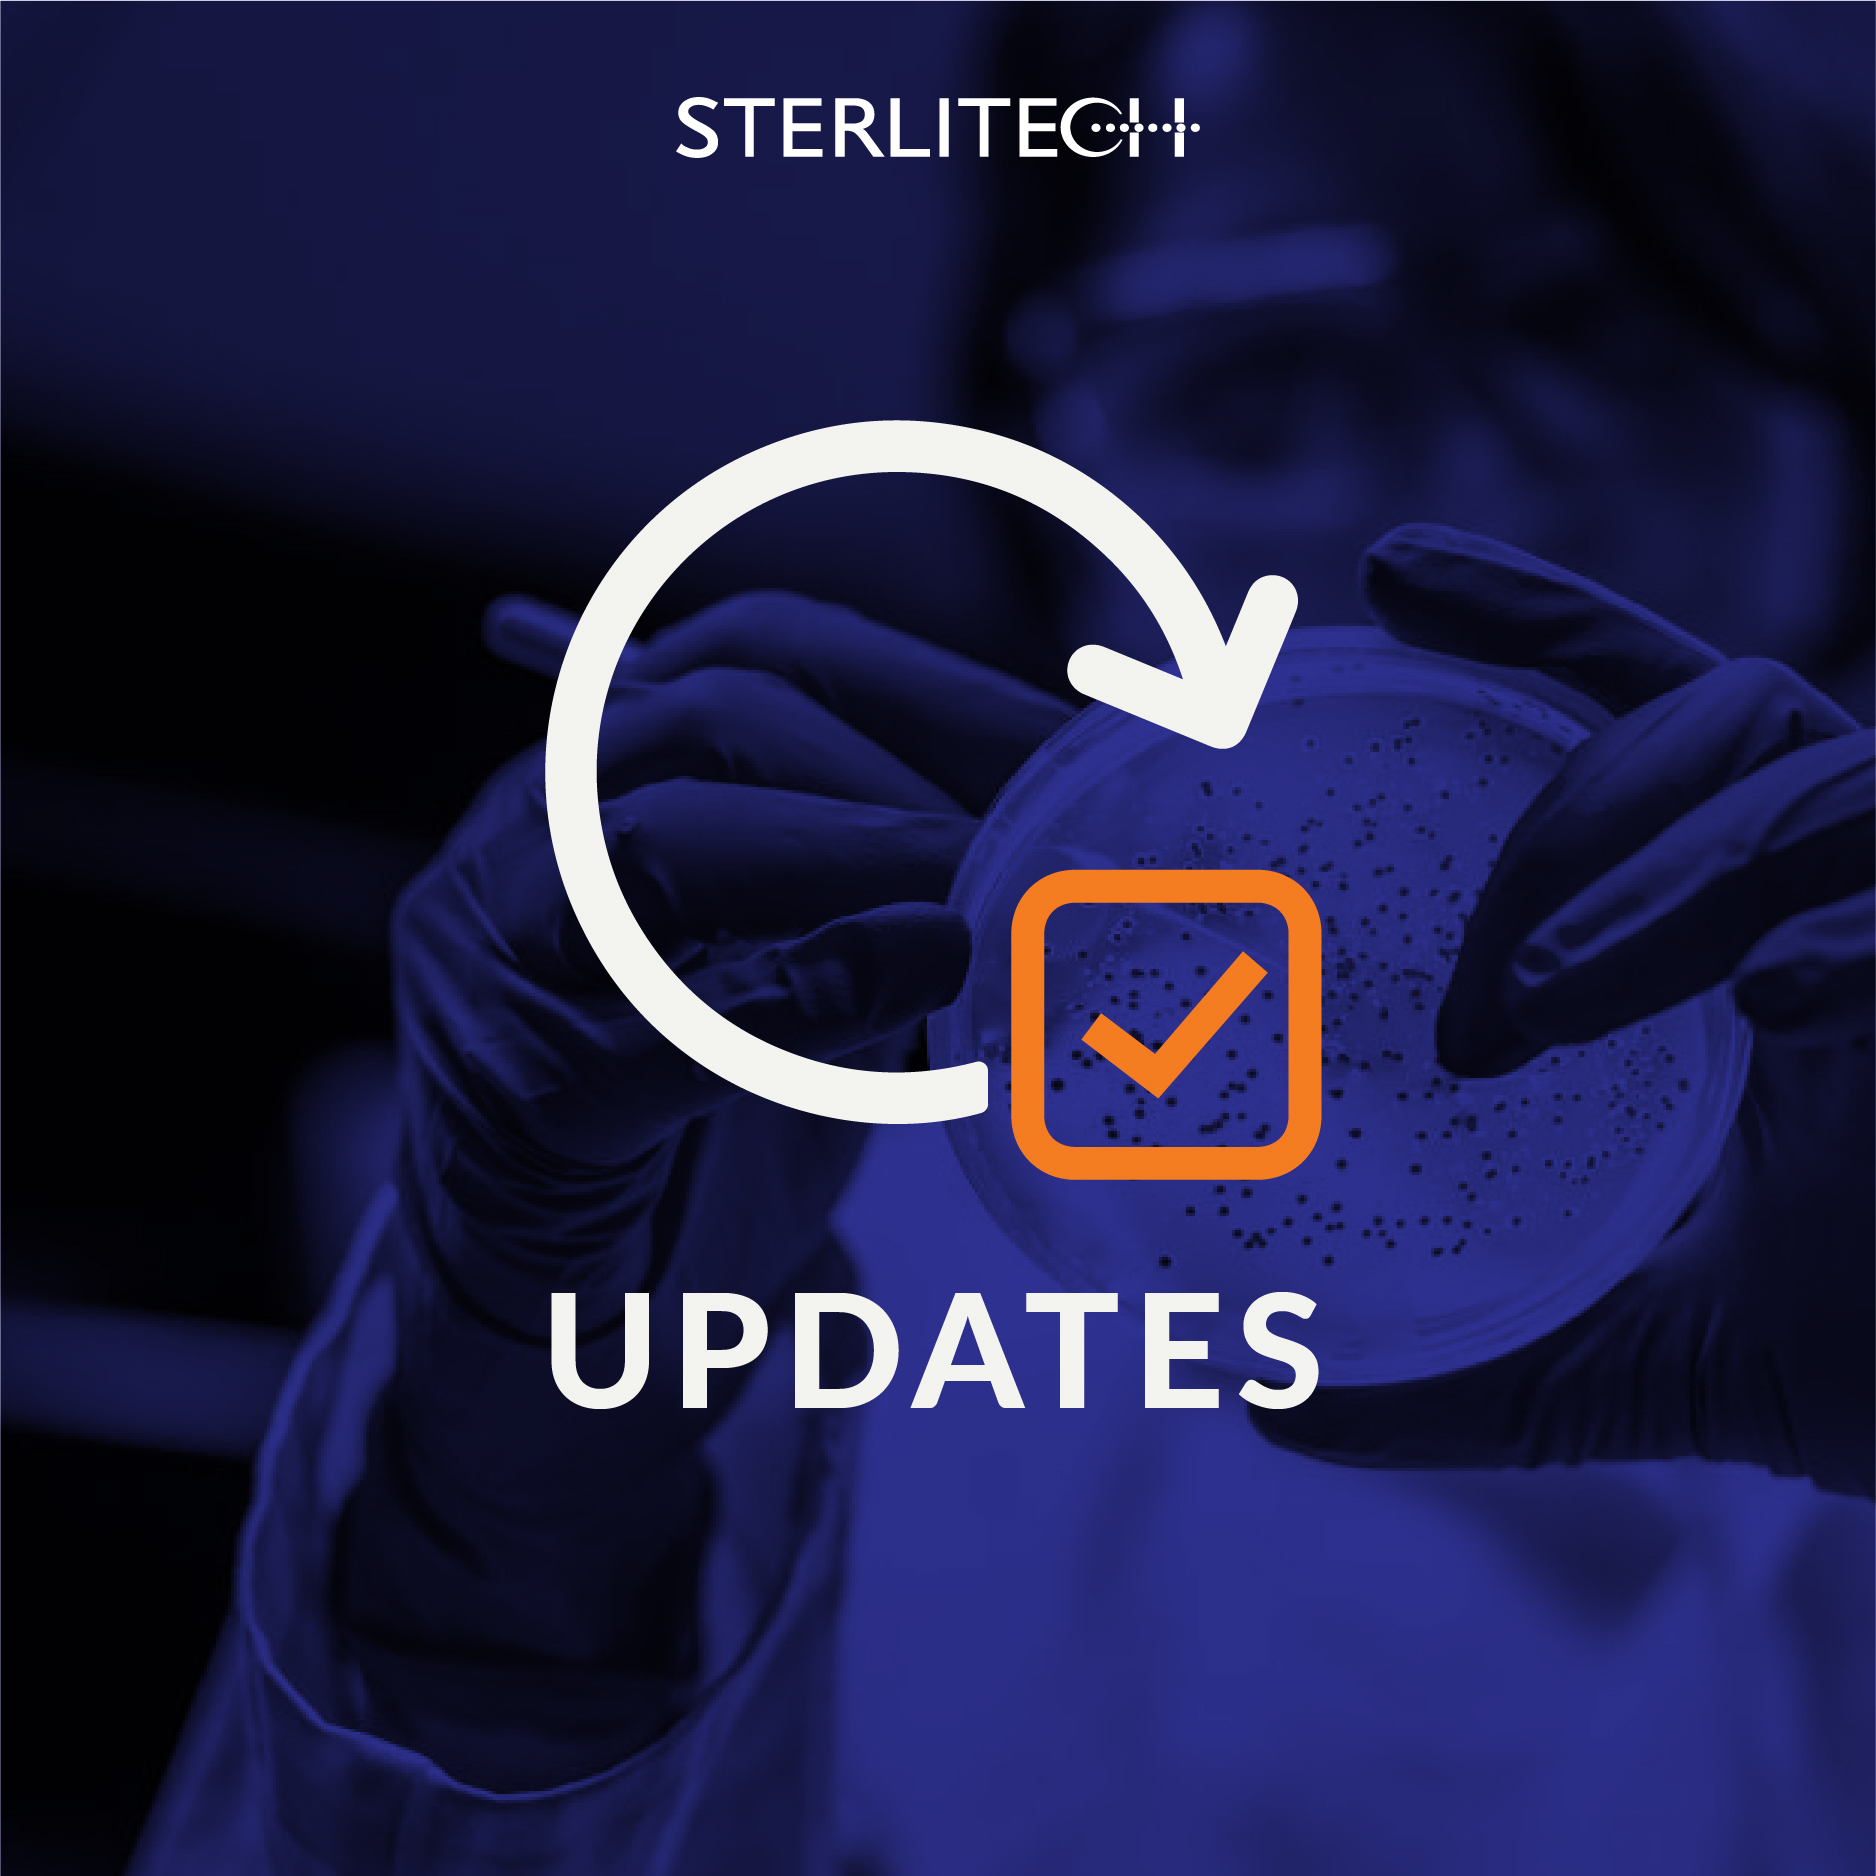 Sterlitech Introduces New Microbiology and Life Sciences Section